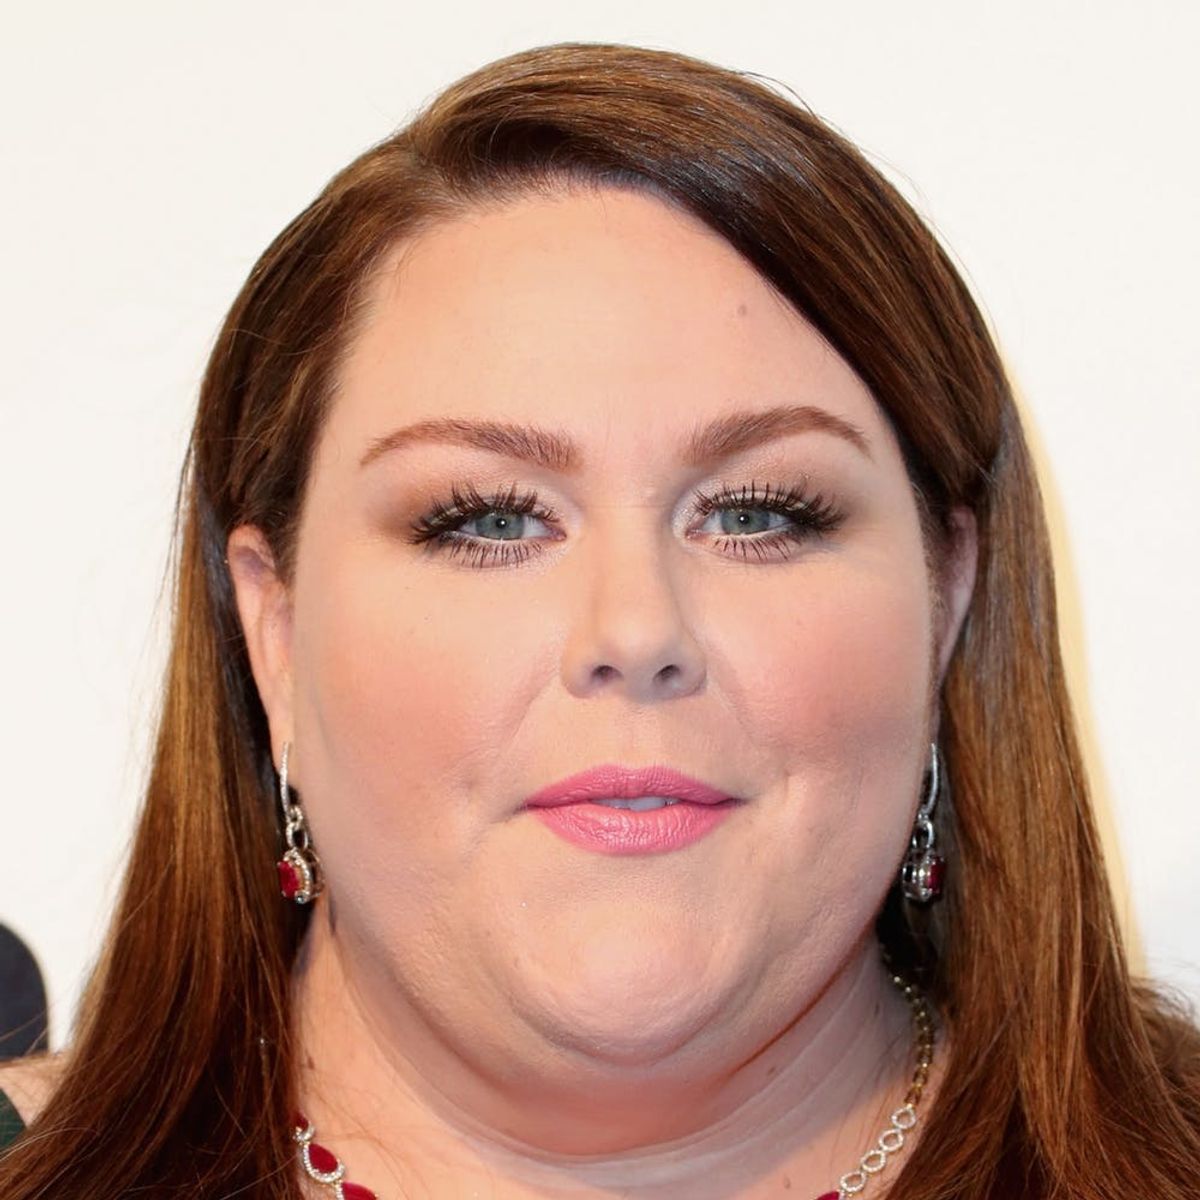 This Is Us Star Chrissy Metz Calls Sexy Pin-up Shoot for Harper’s Bazaar “Validation”